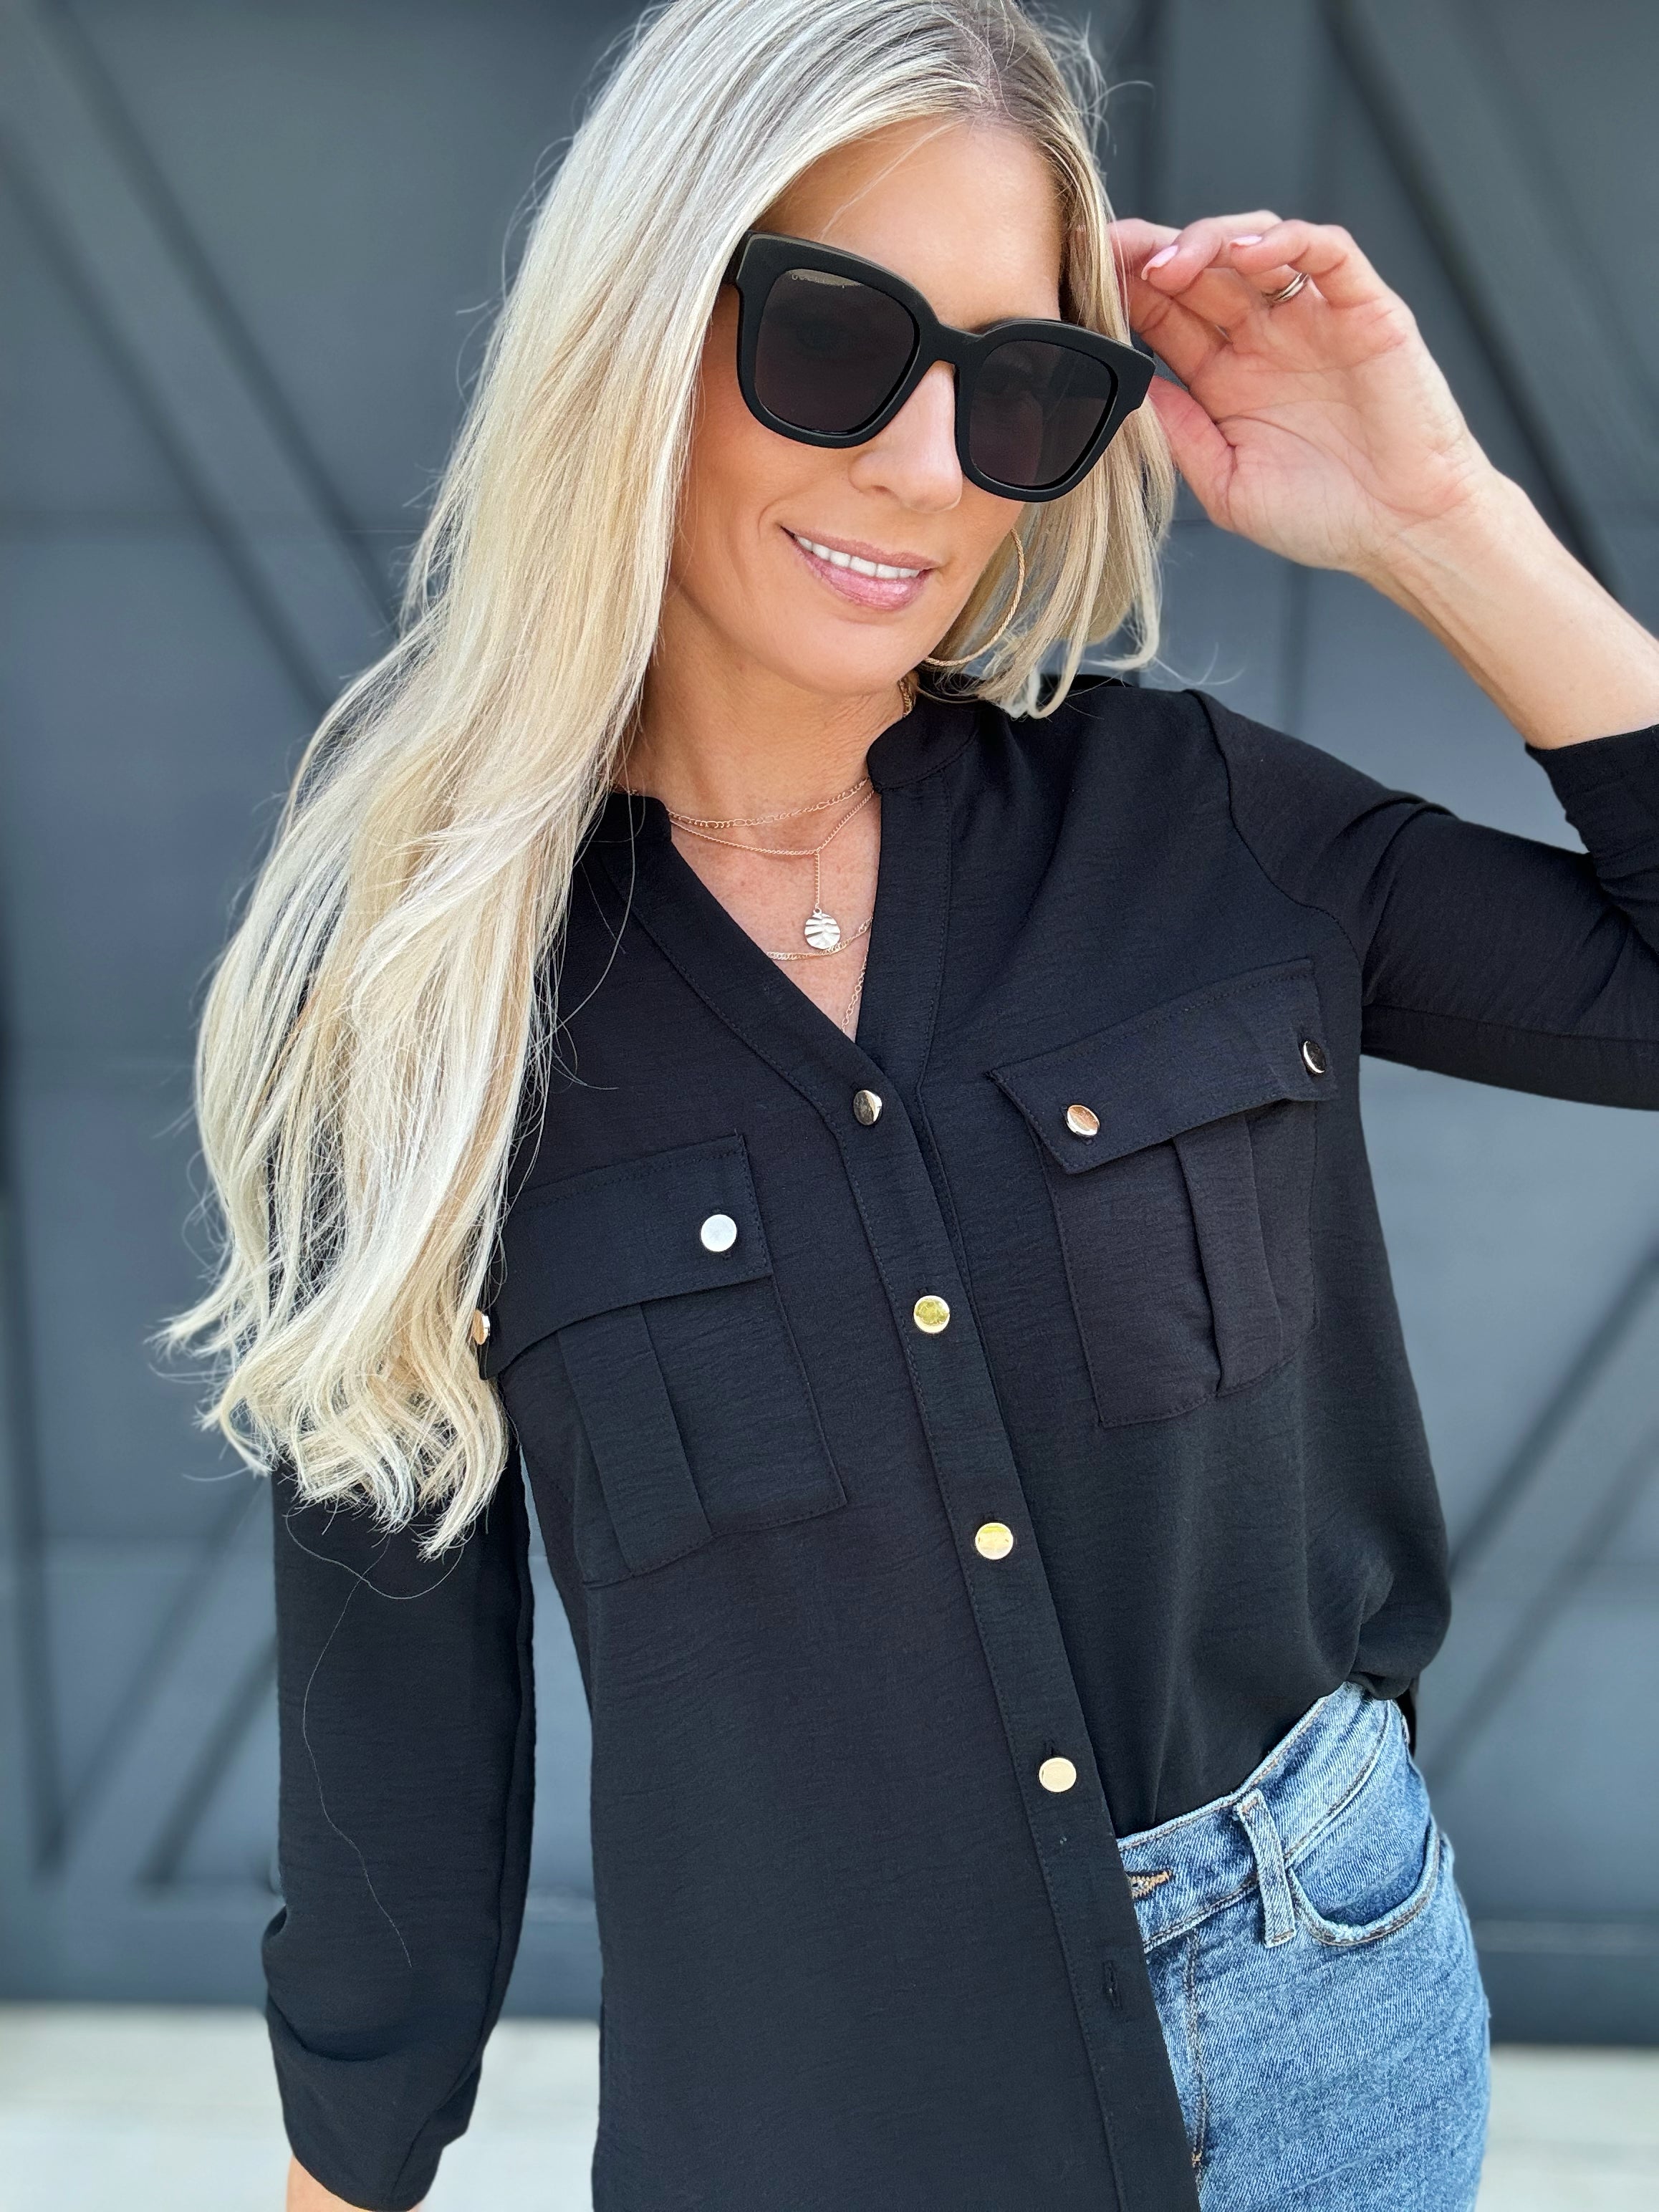 Gold Snap Blouse In Black - Infinity Raine